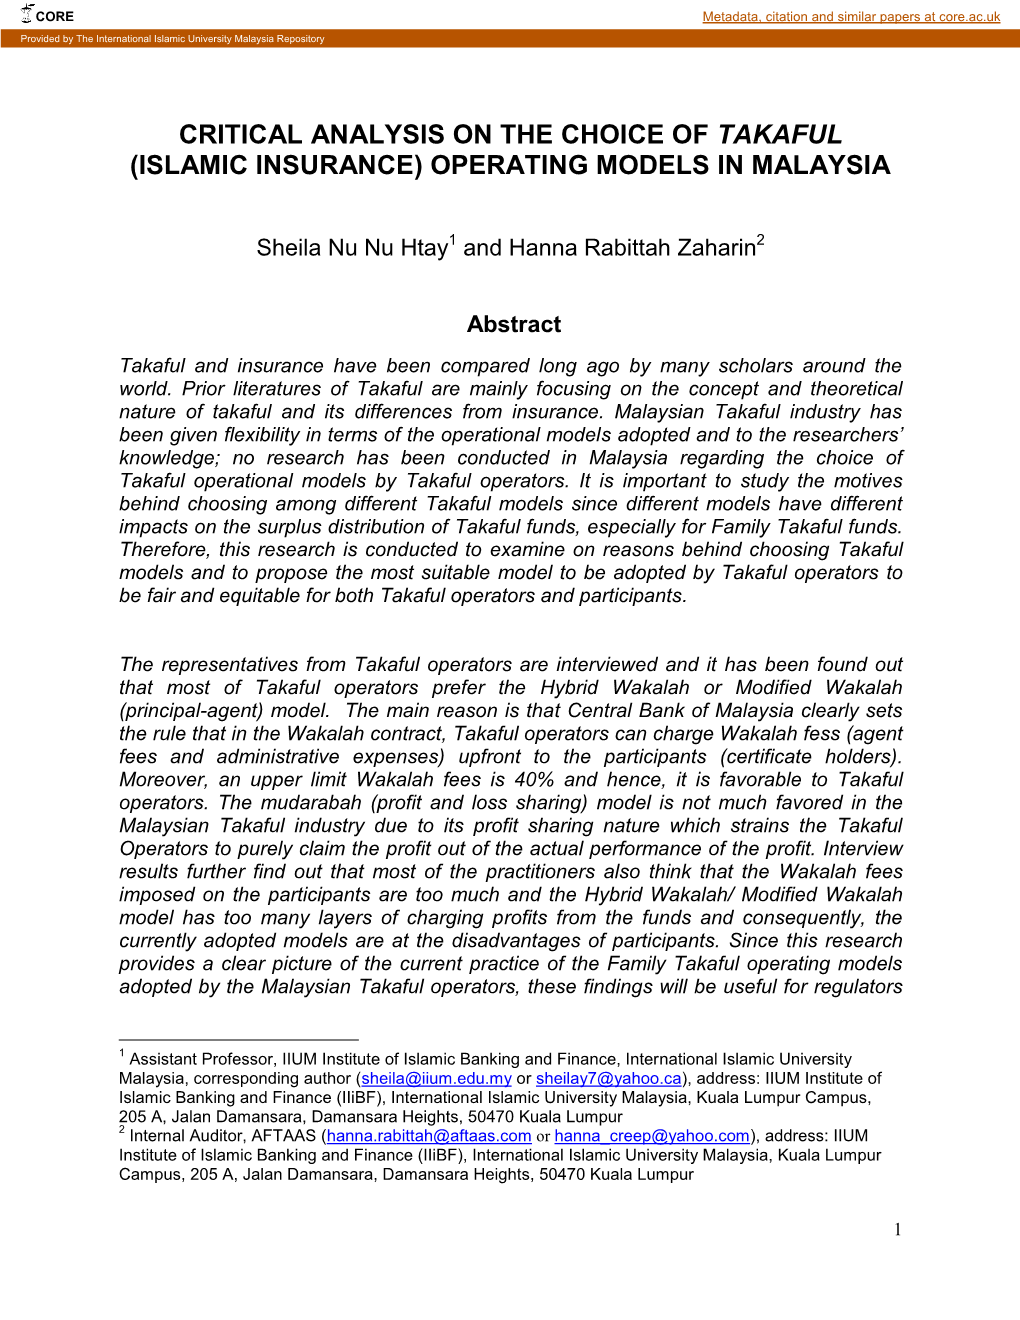 Critical Analysis on the Choice of Takaful (Islamic Insurance) Operating Models in Malaysia